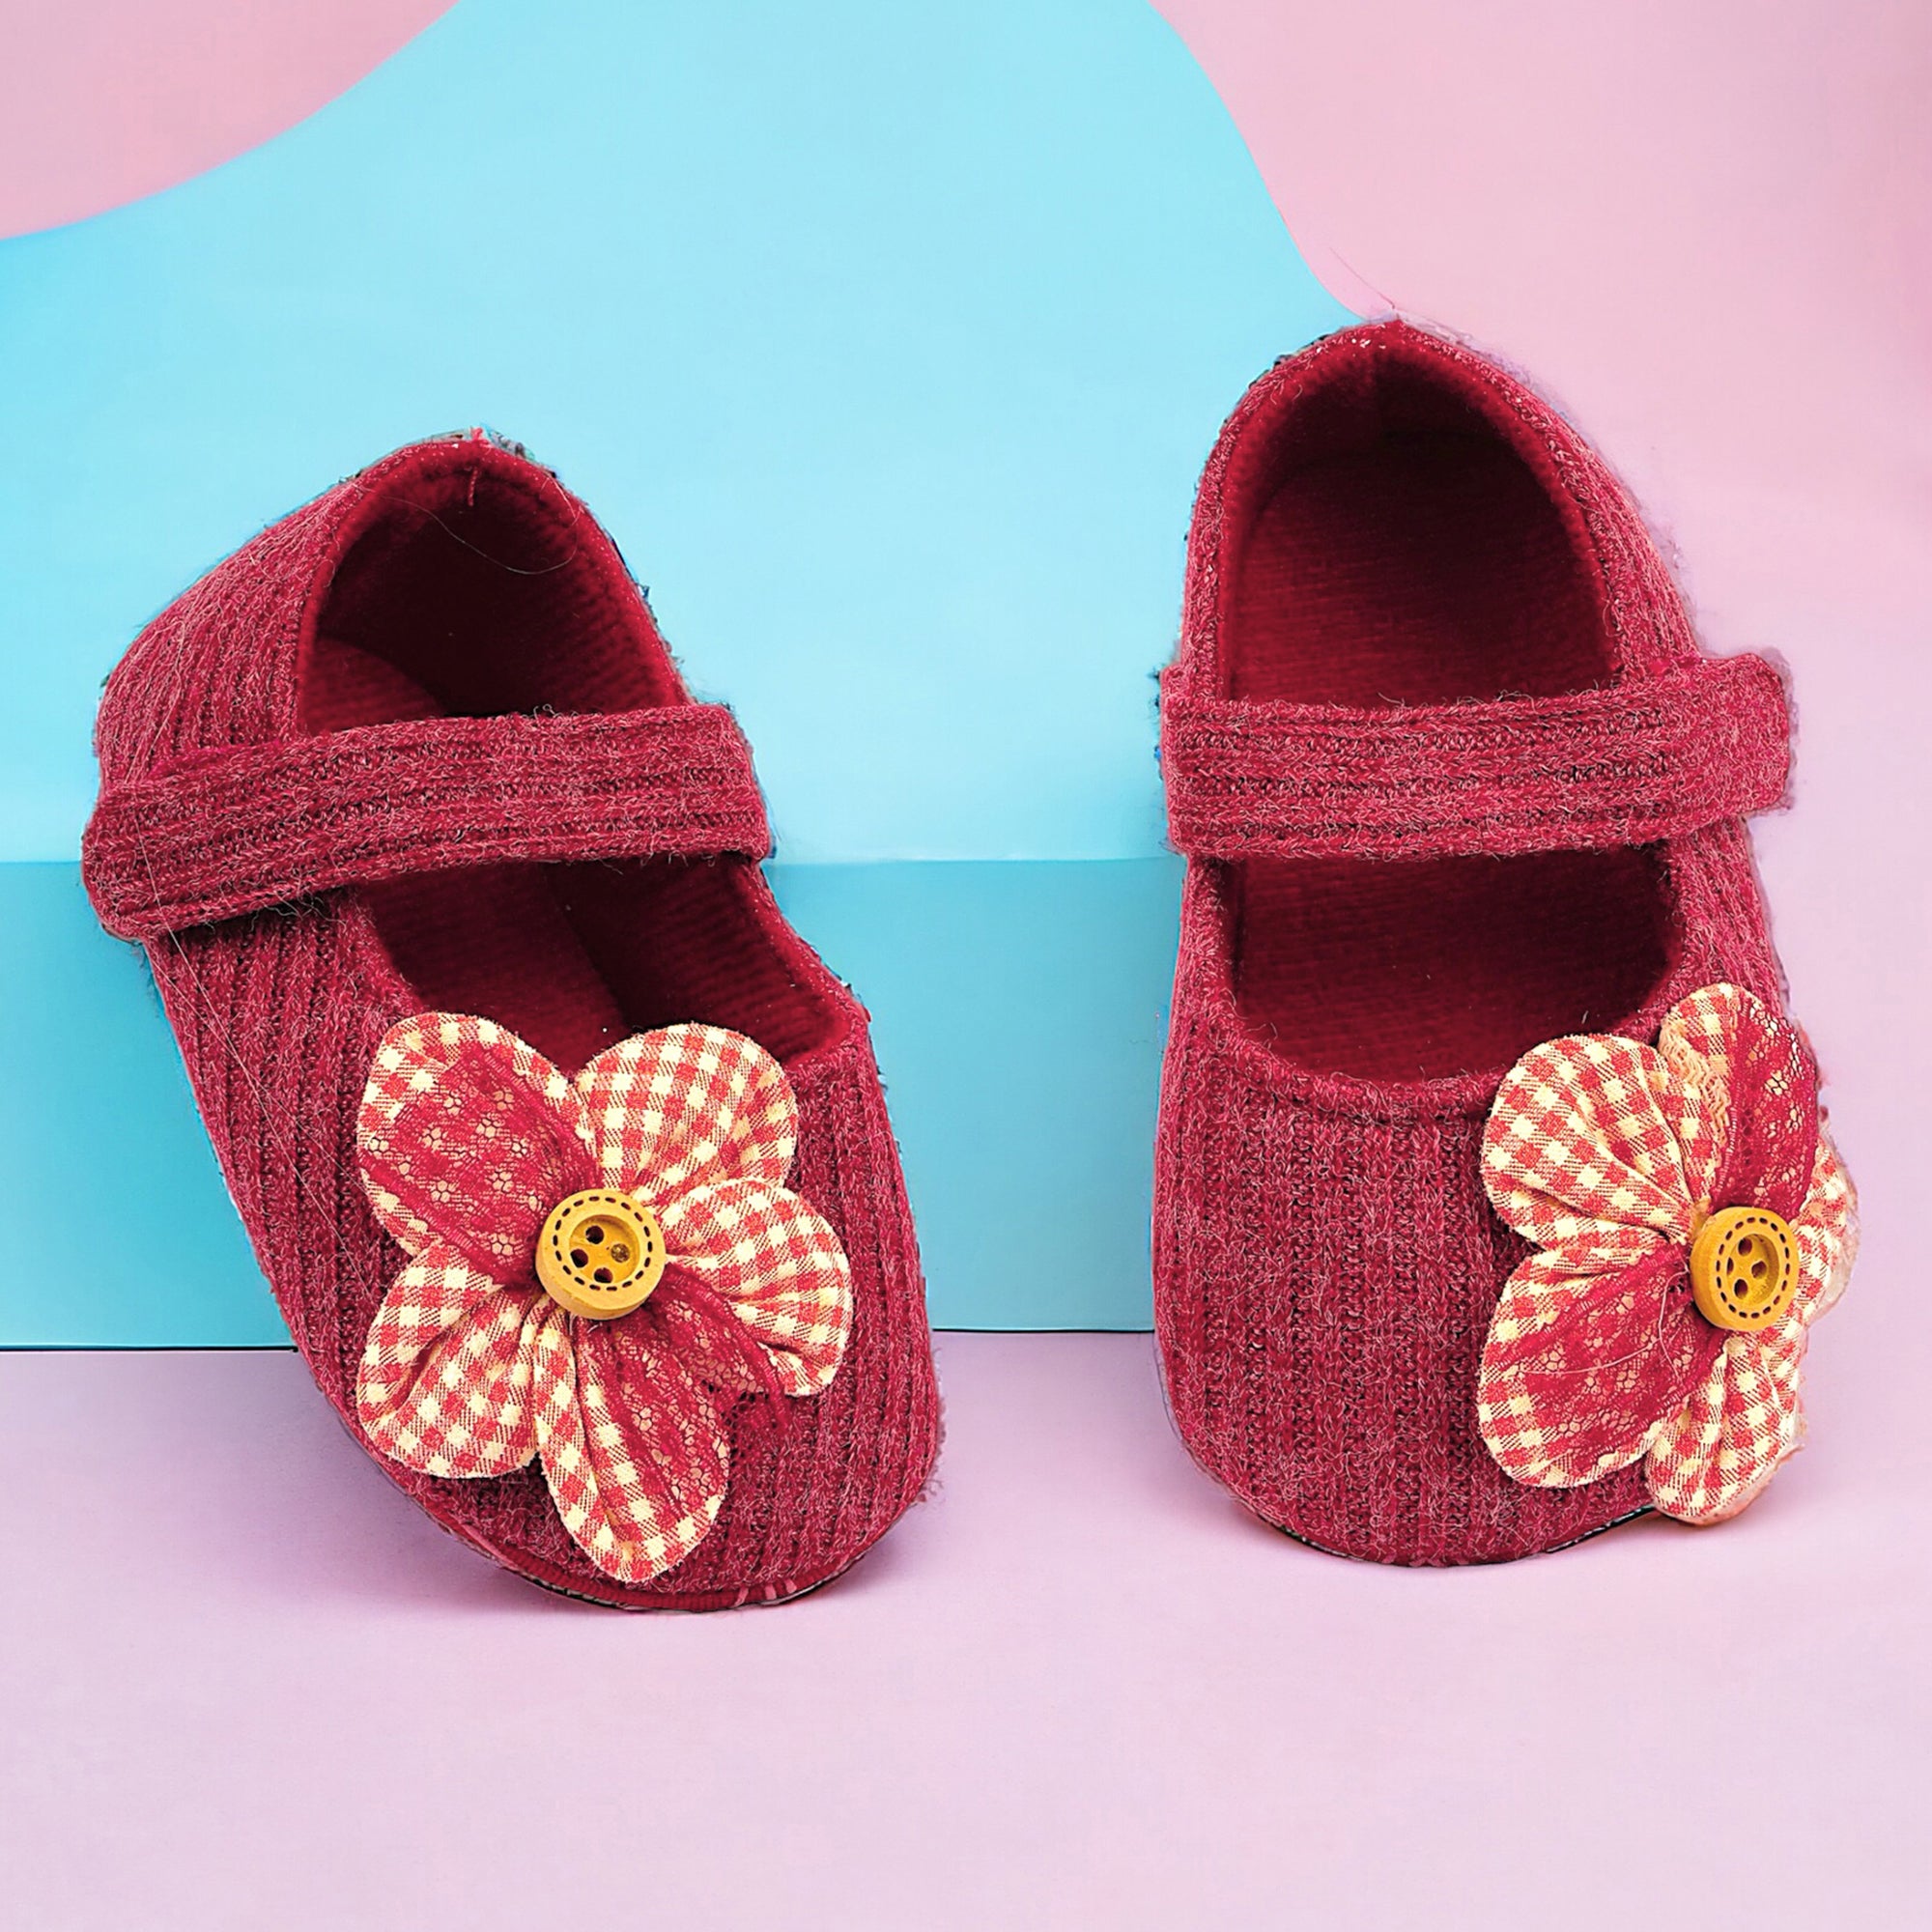 Baby Moo Flower Button Velcro Strap Ribbed Anti-Skid Ballerina Booties - Red